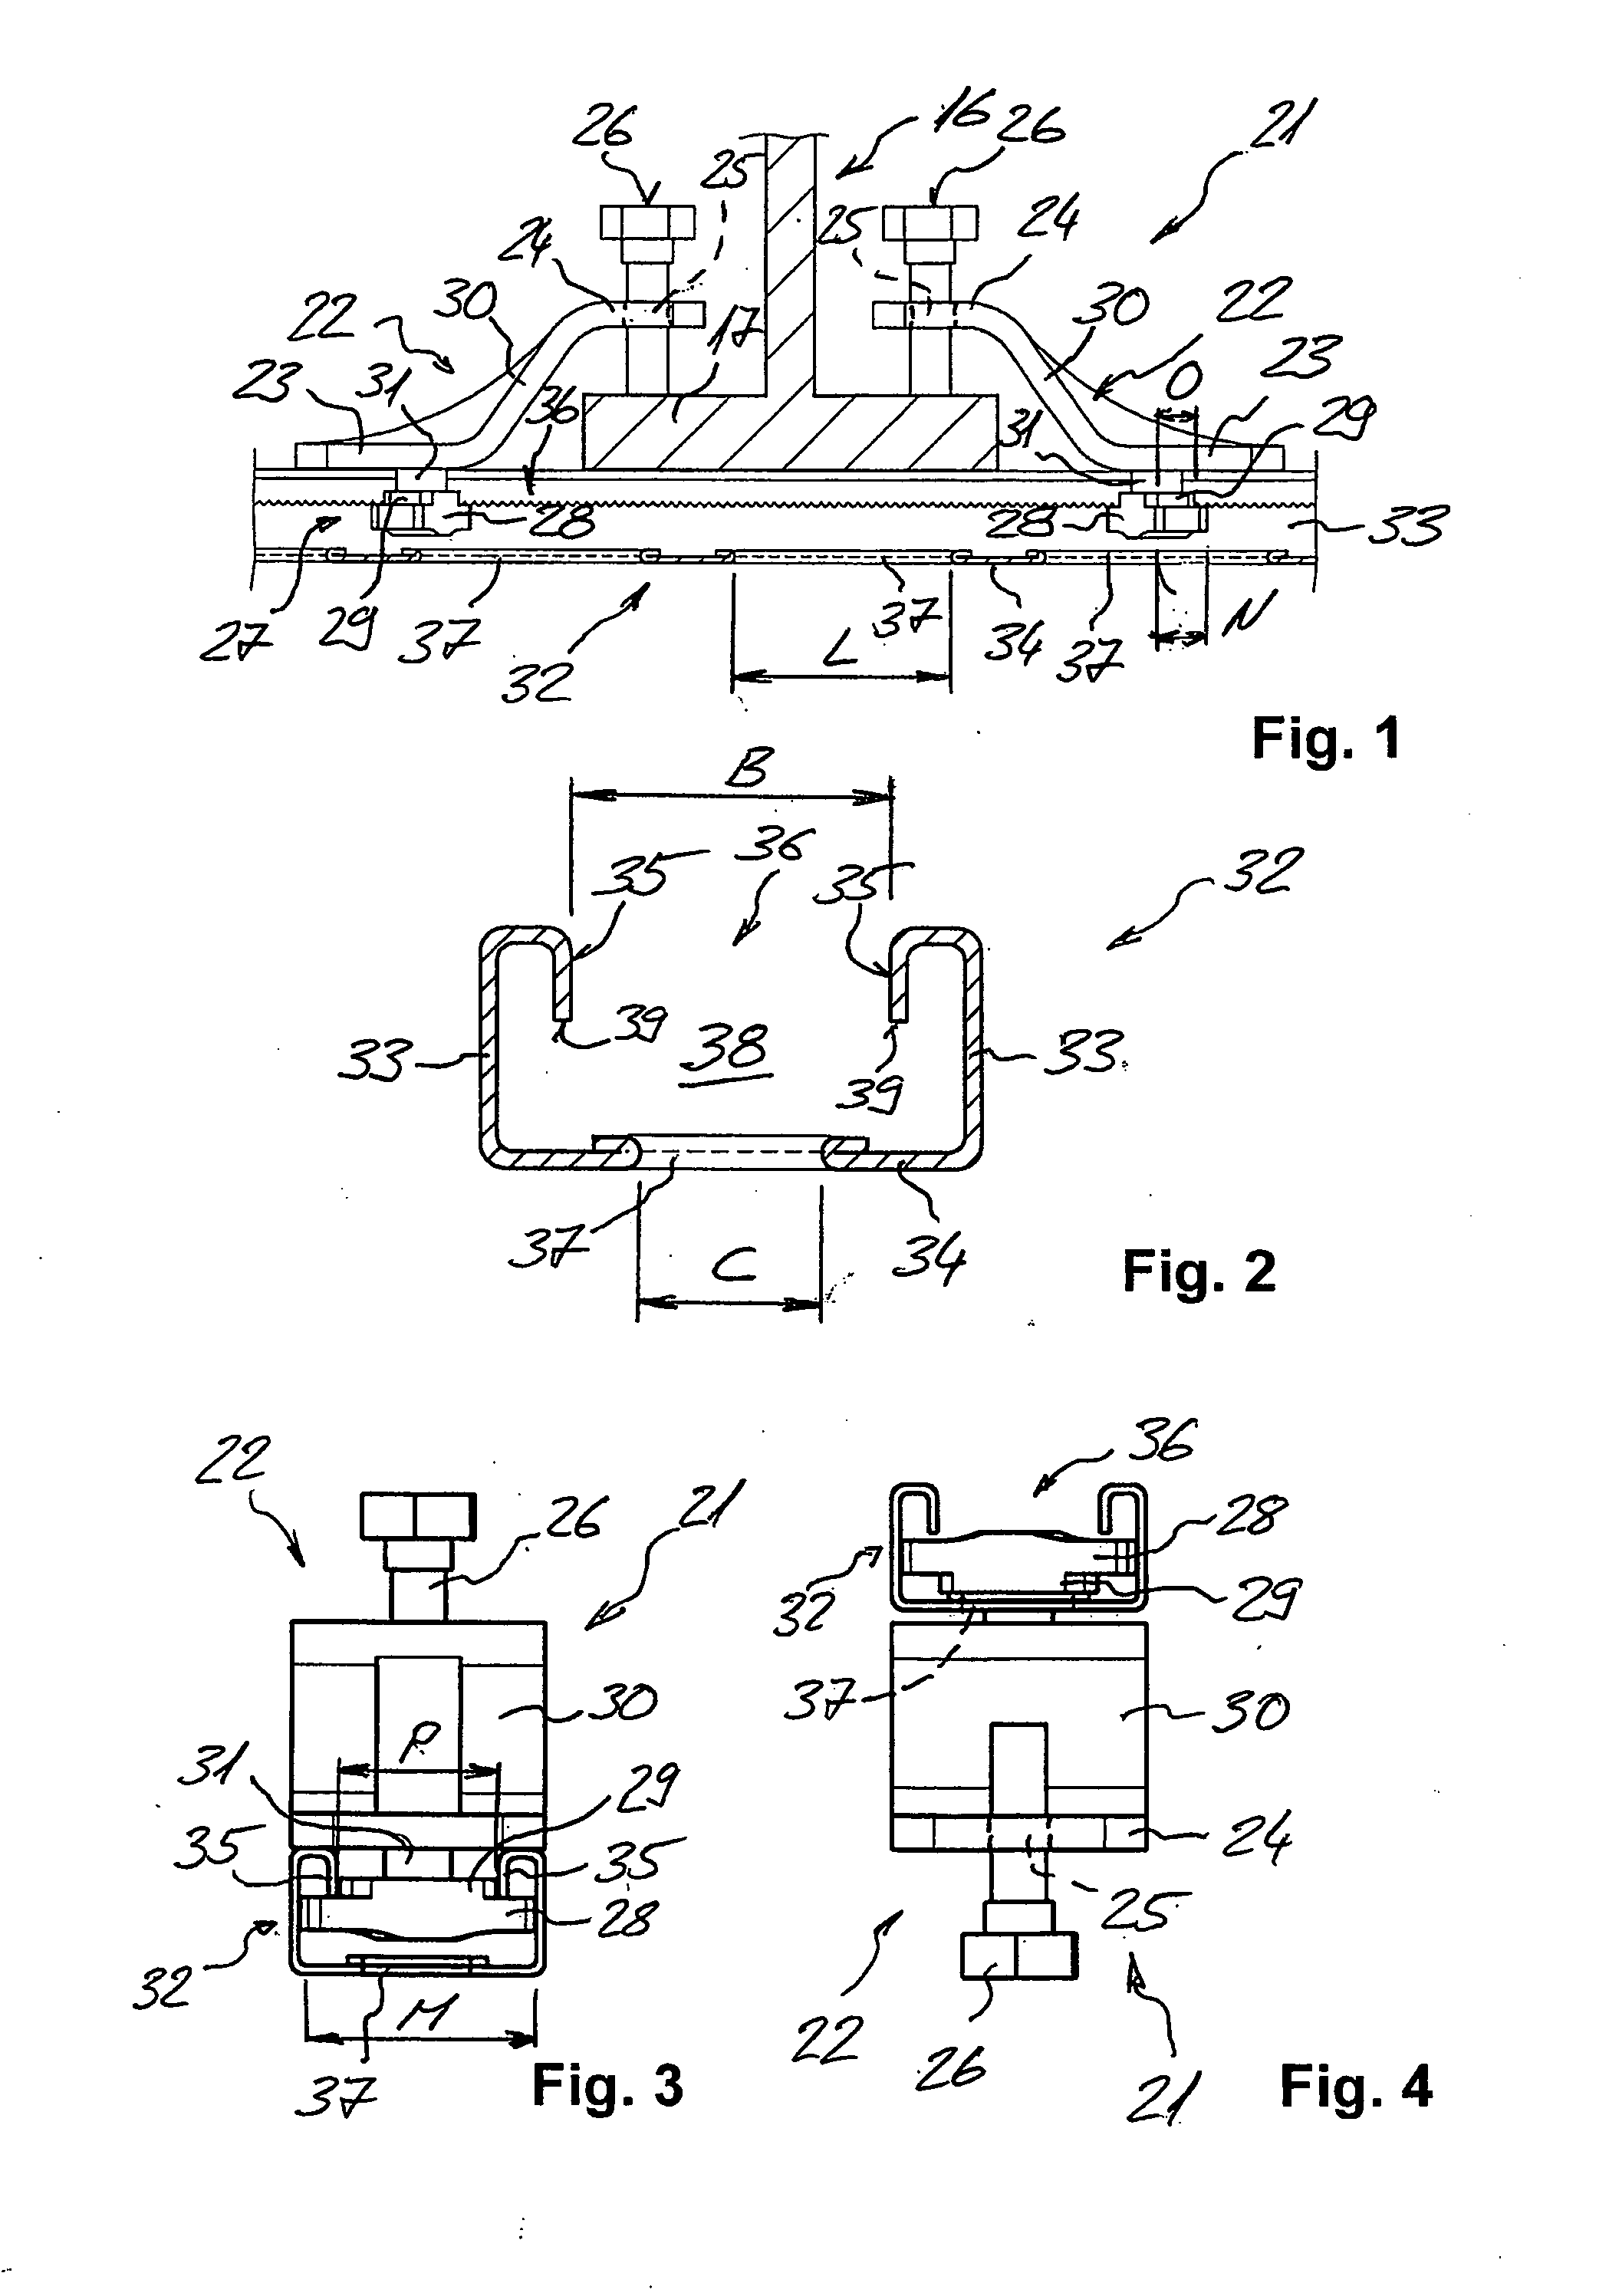 Channel joining system with a mounting channel and a joining part for joining the mounting channel to a support